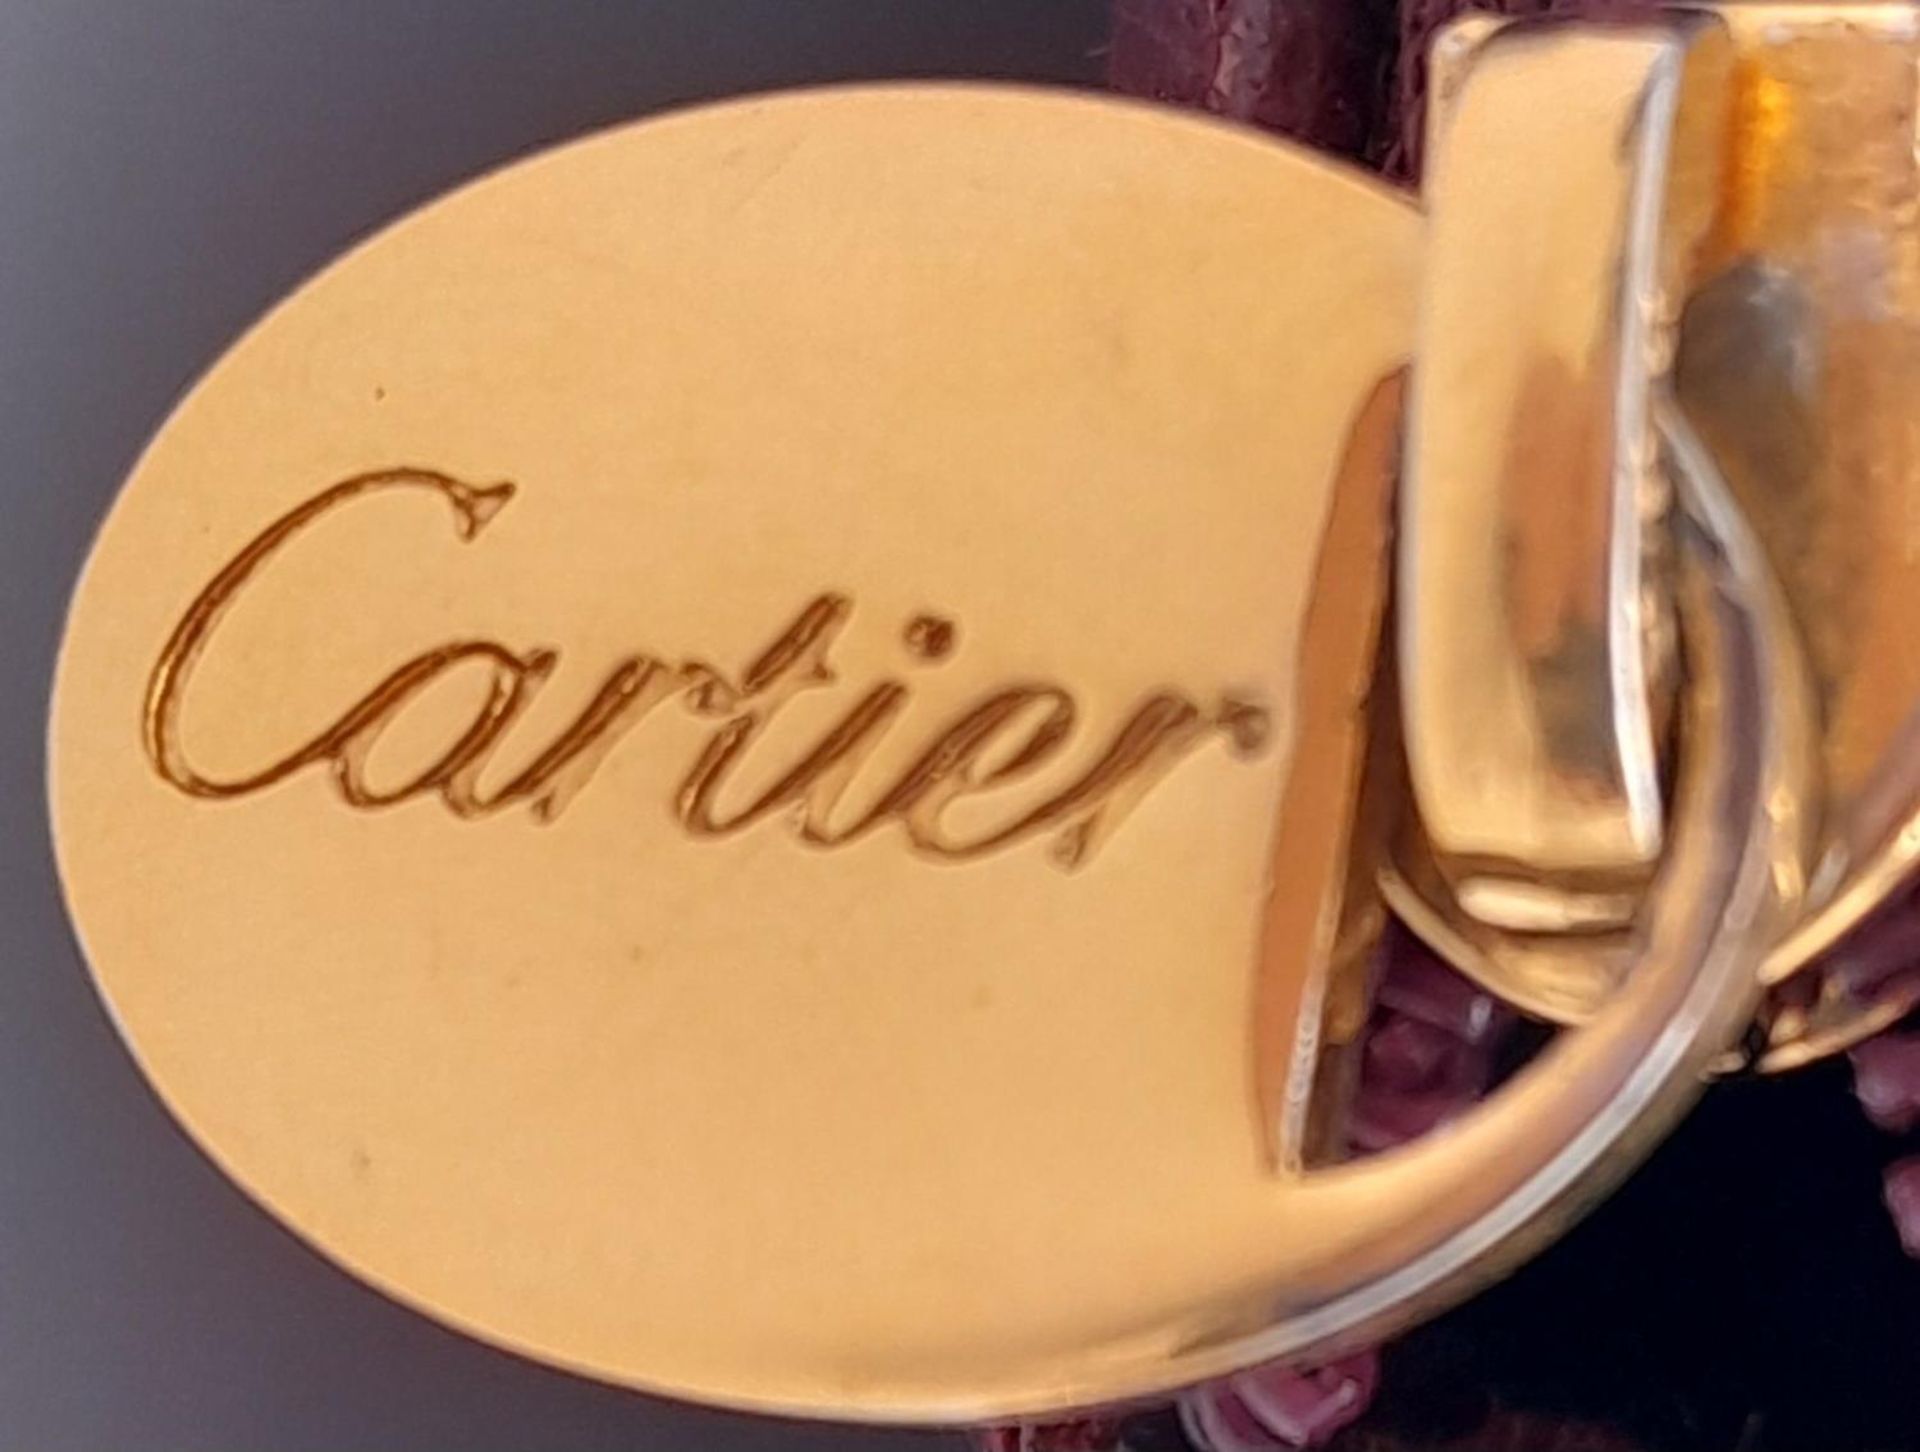 A Vintage Cartier Burgundy Pouch. Leather exterior with zip top closure. Burgundy canvas interior. - Image 6 of 11